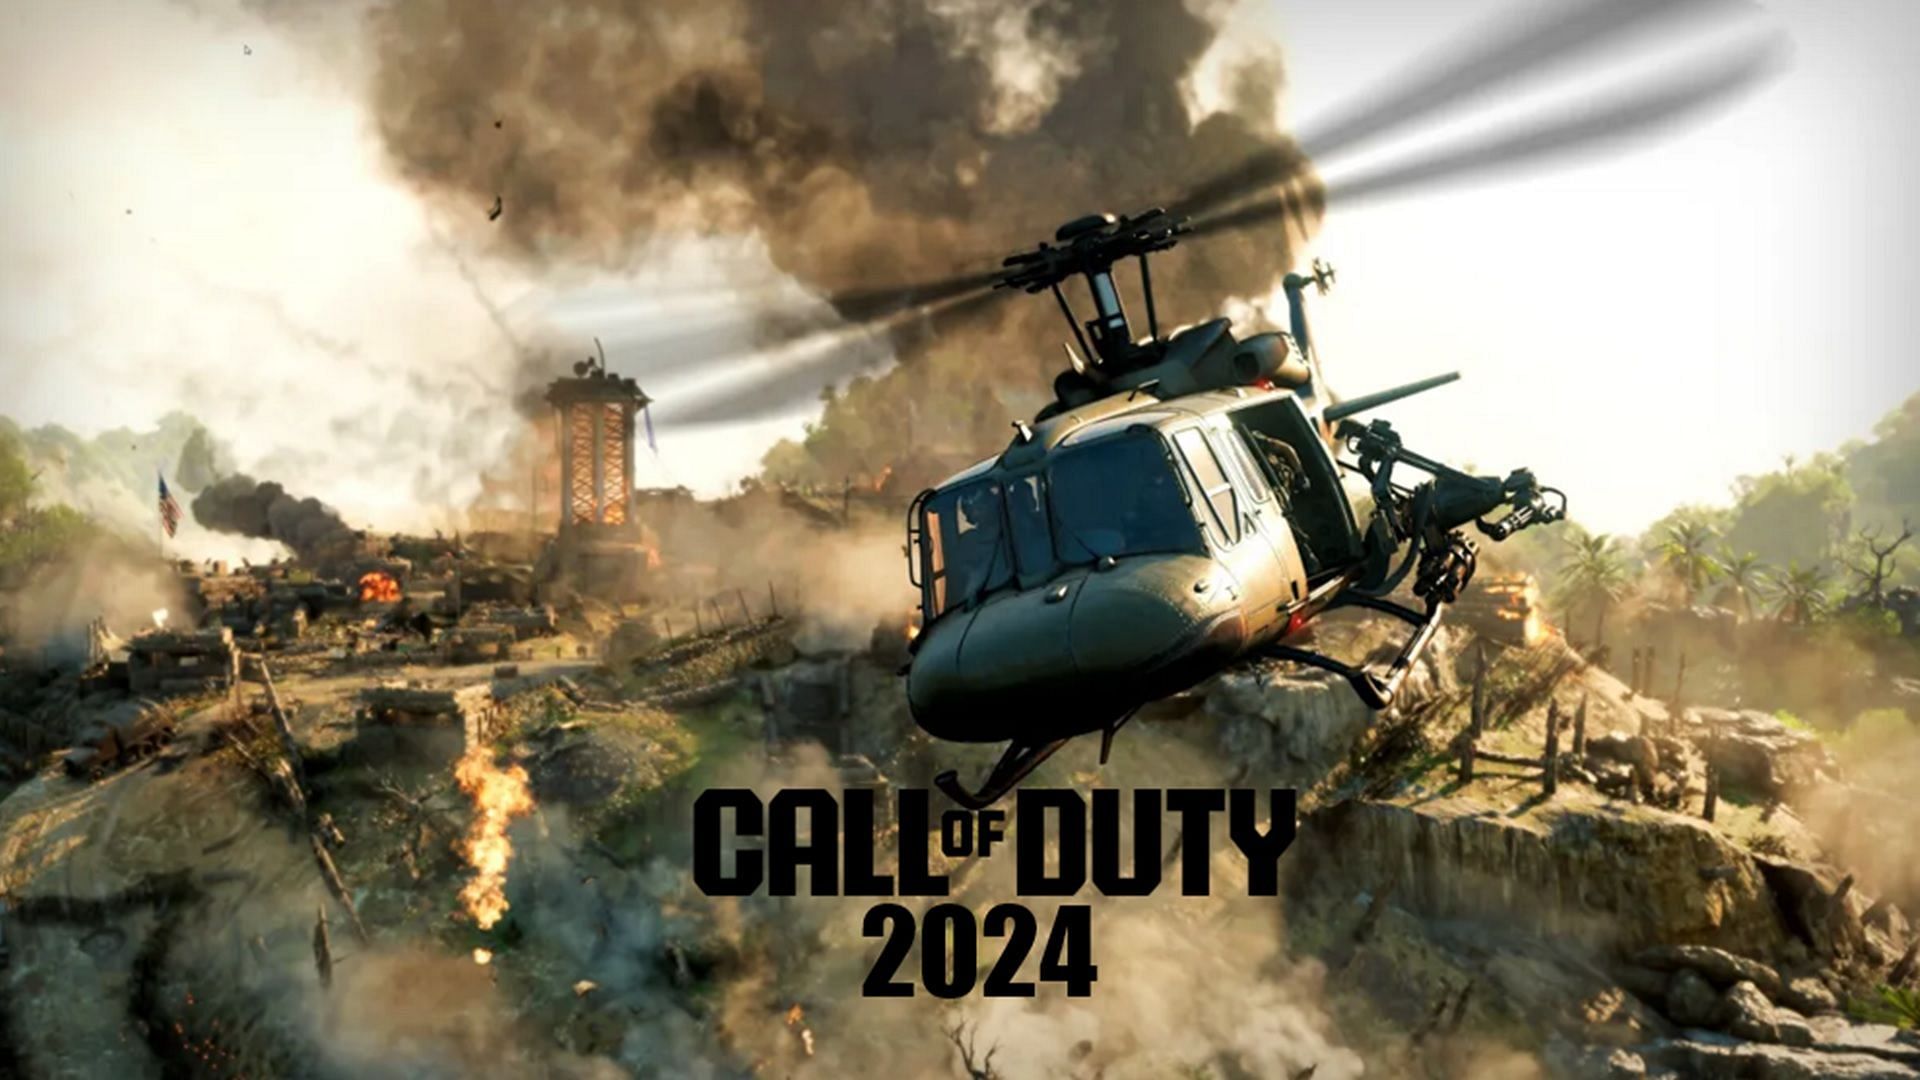 CoD 2024 is expected to release in October (Image via Activision)